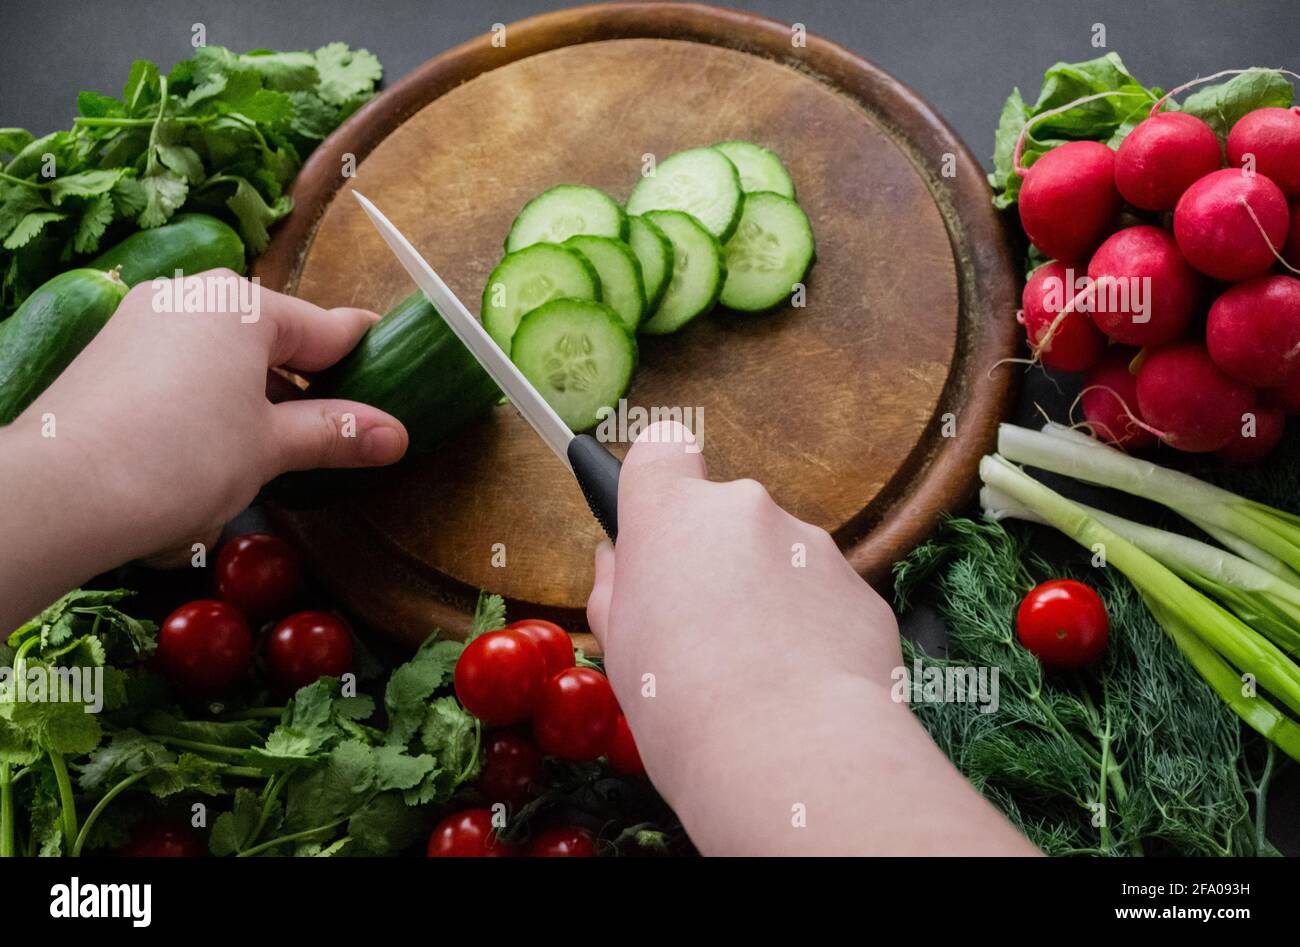 Hands cutting cucumber with a white ceramic knife on a round wooden chopping board. Around the board are ripe fresh vegetables: tomatoes, onions, radi Stock Photo